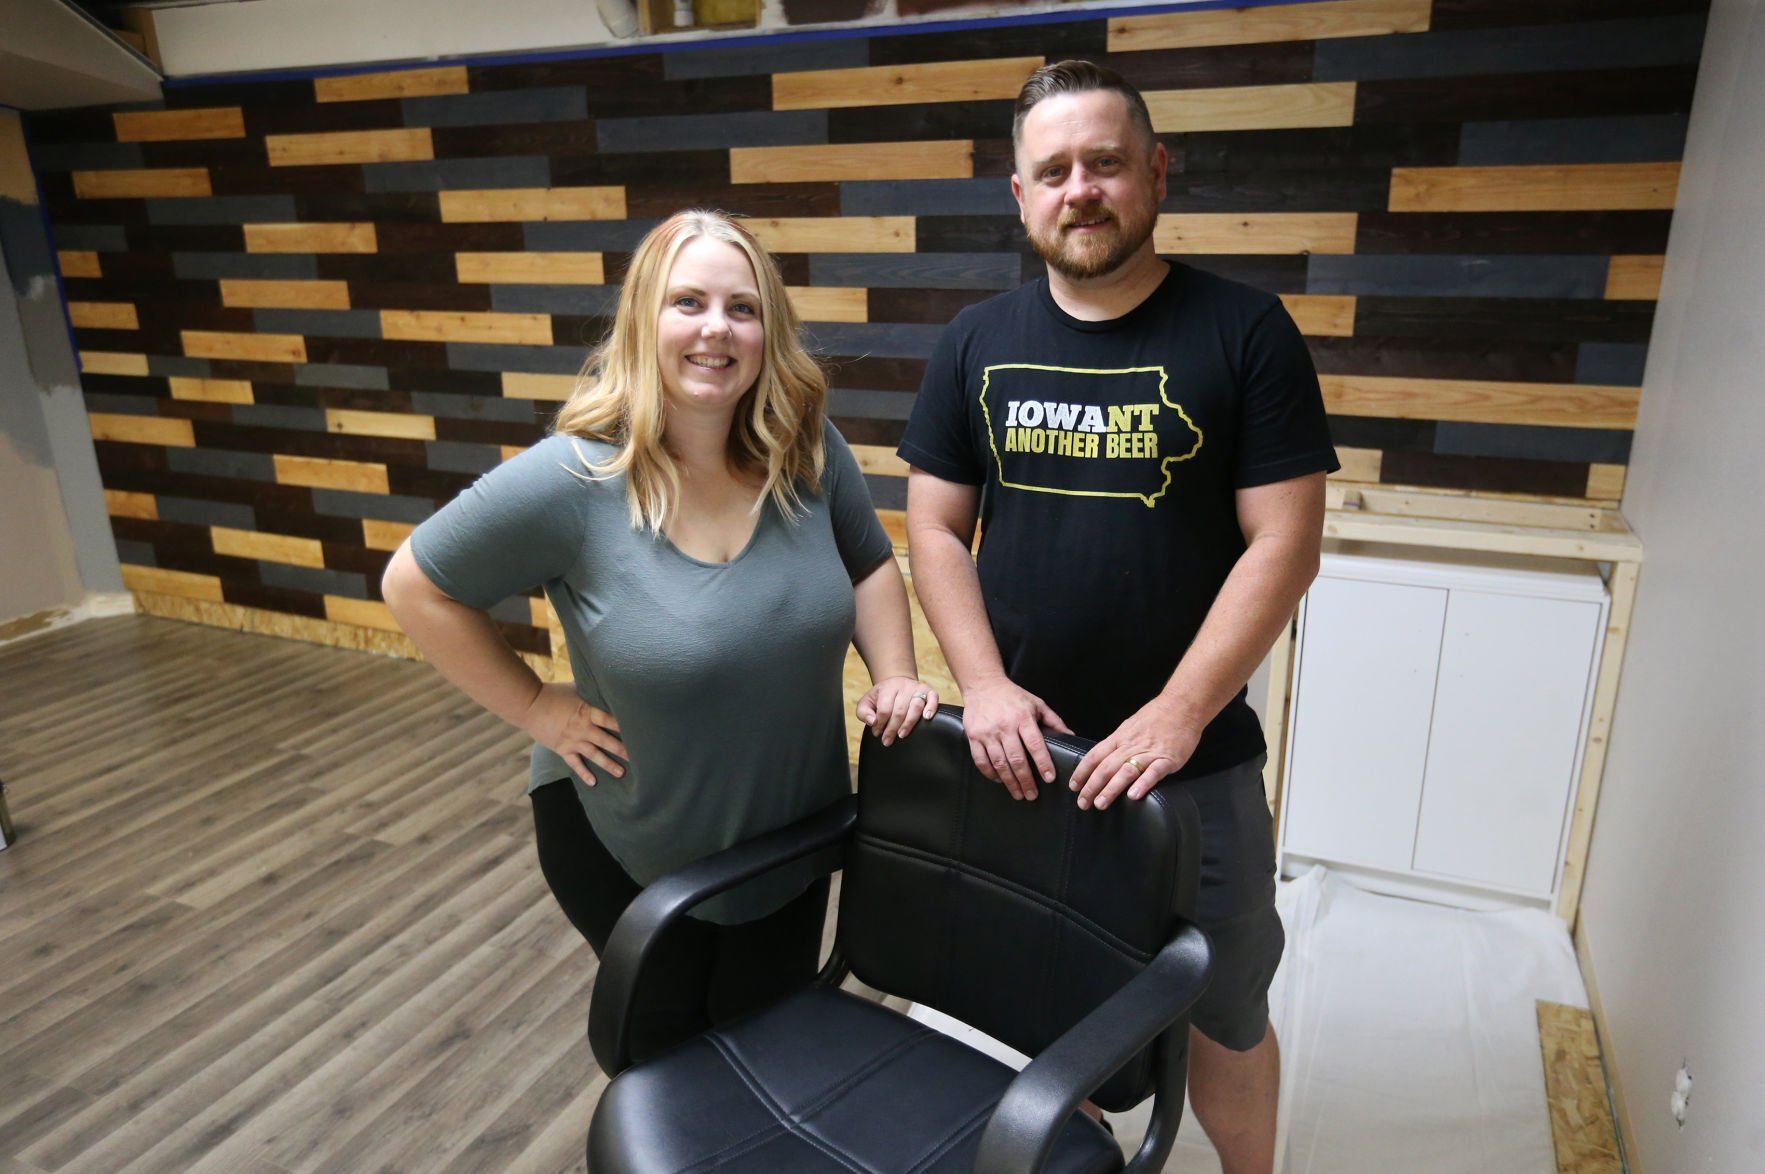 Owners Heather Oehlerking and her husband, Randy, are opening The Man Cave Cut Shop in Peosta, Iowa.    PHOTO CREDIT: JESSICA REILLY